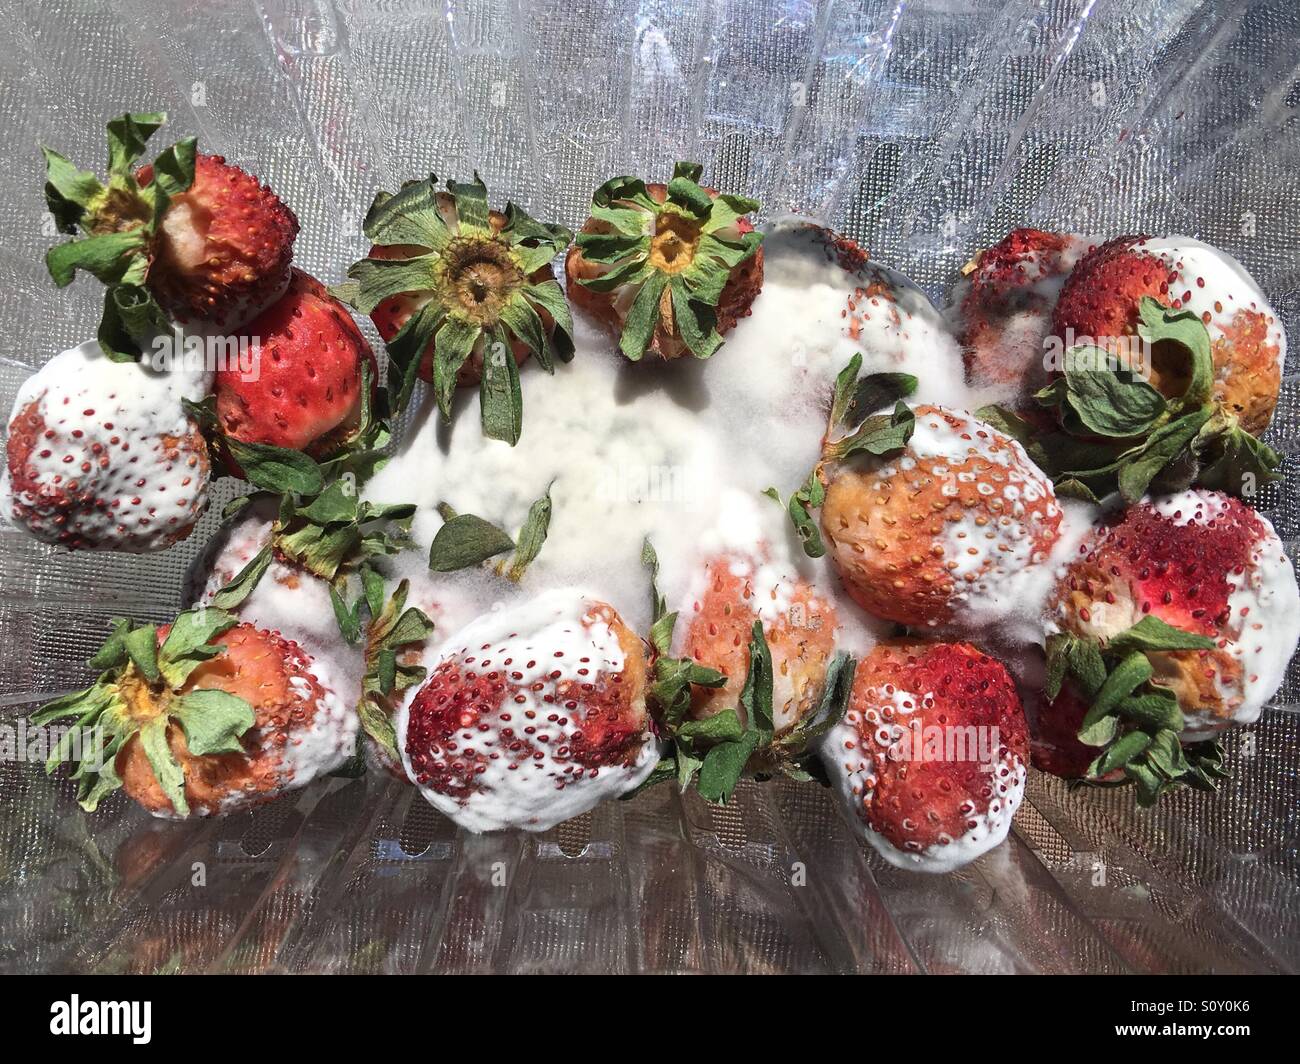 Mouldy strawberries Stock Photo